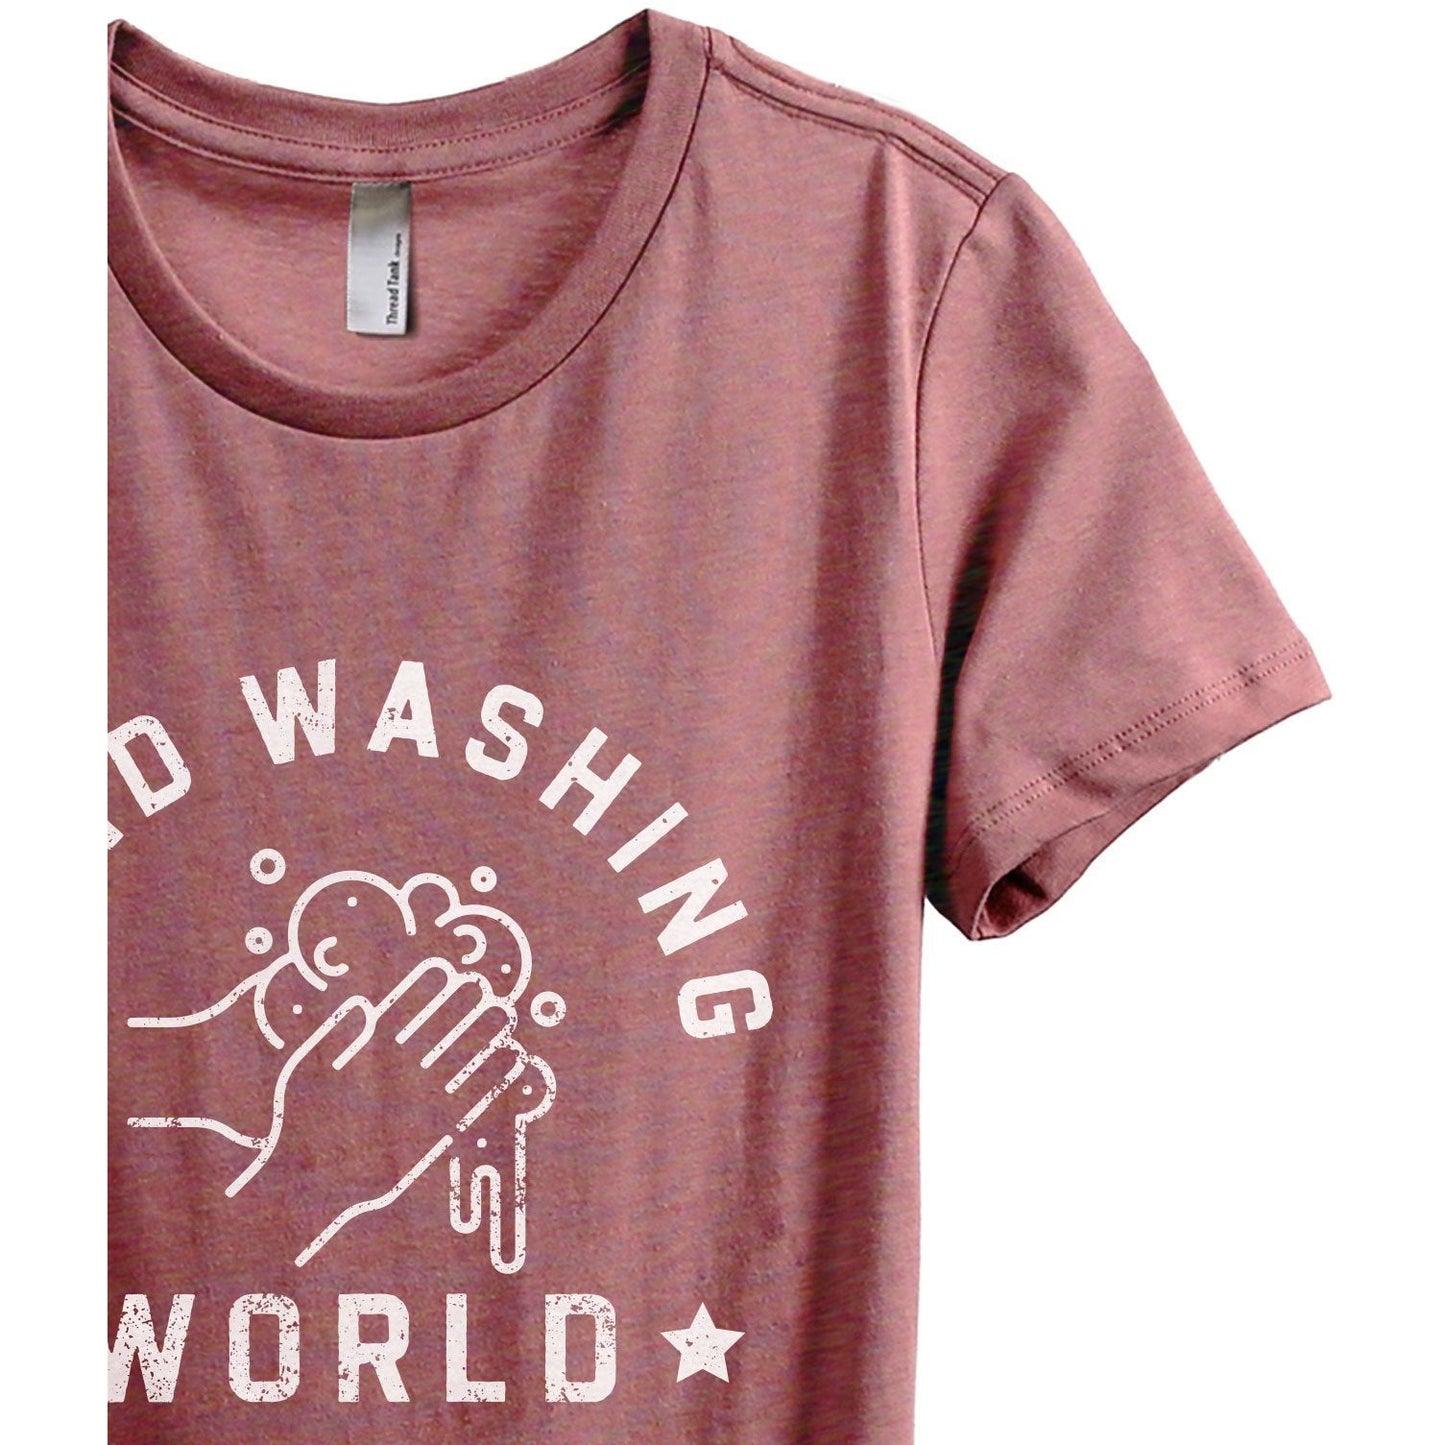 Hand Washing World Champion Women's Relaxed Crewneck T-Shirt Top Tee Heather Rouge Zoom Details
